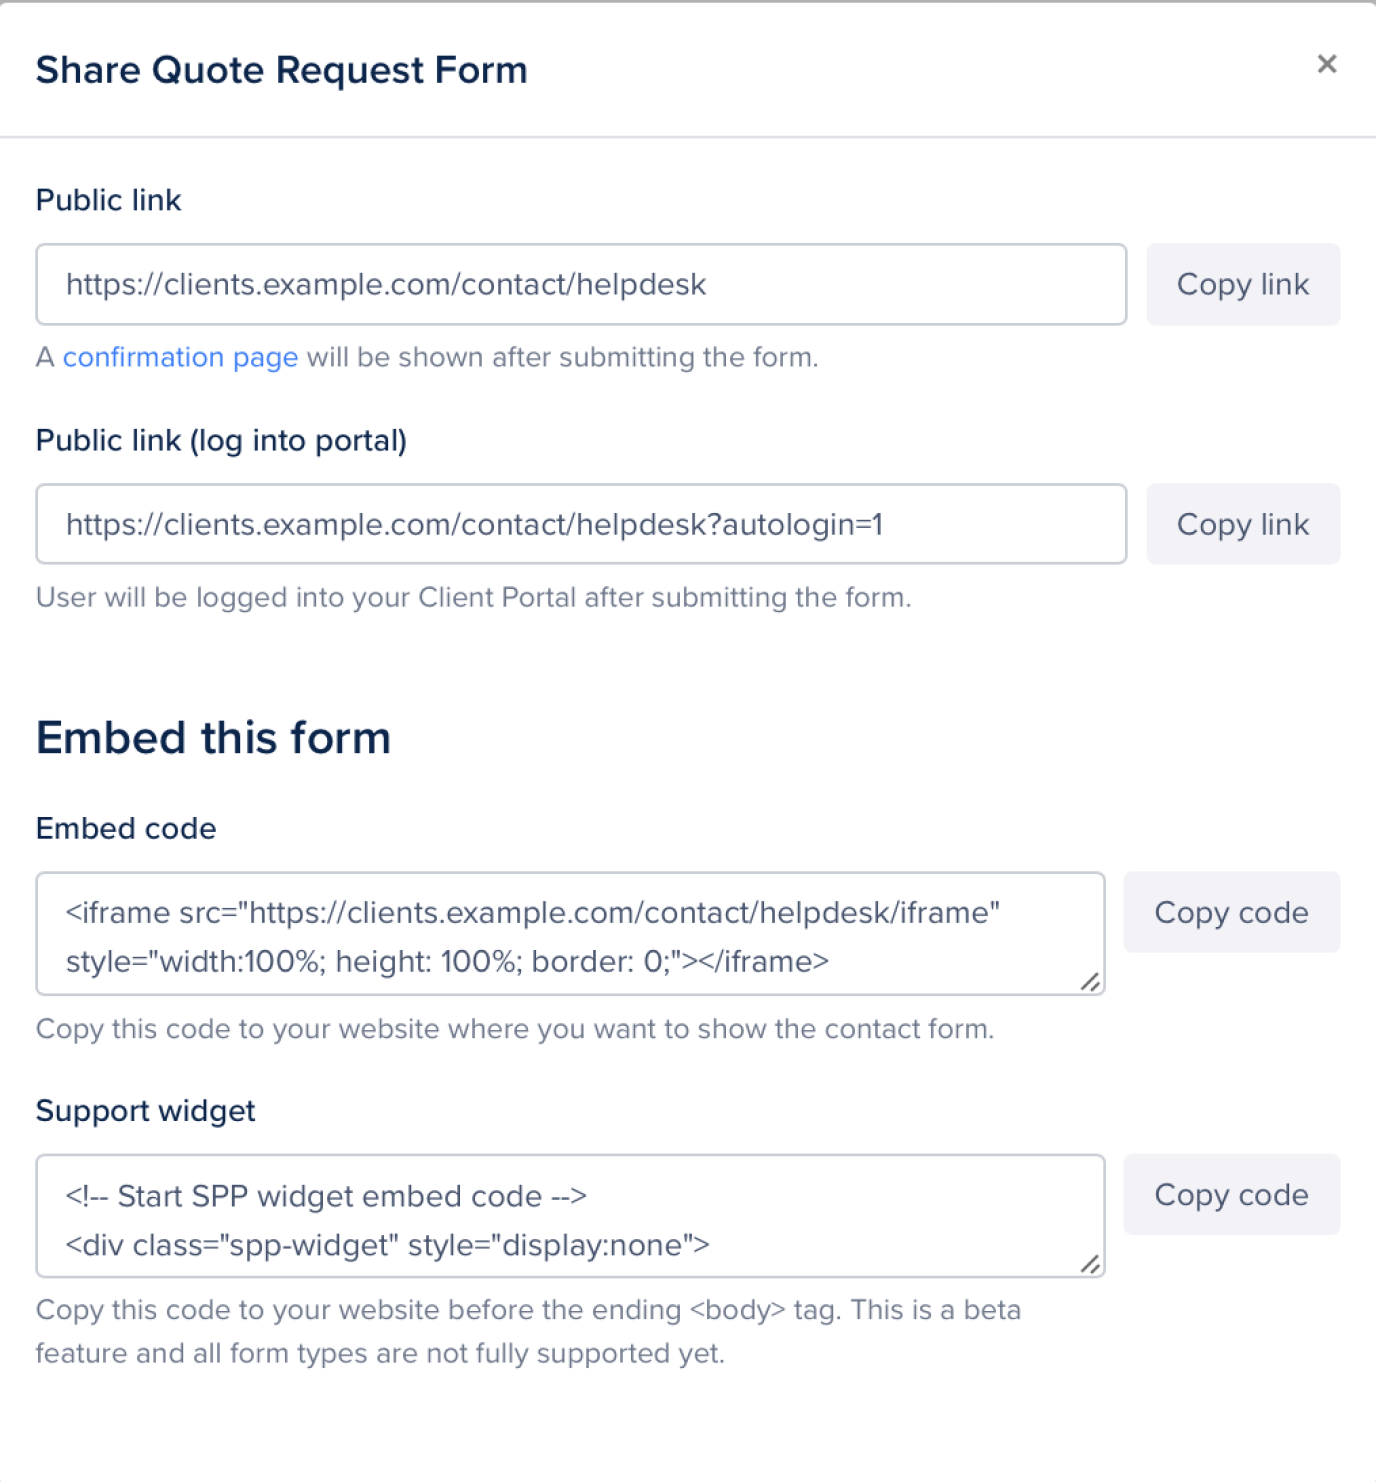 Share and embed contact forms in SPP